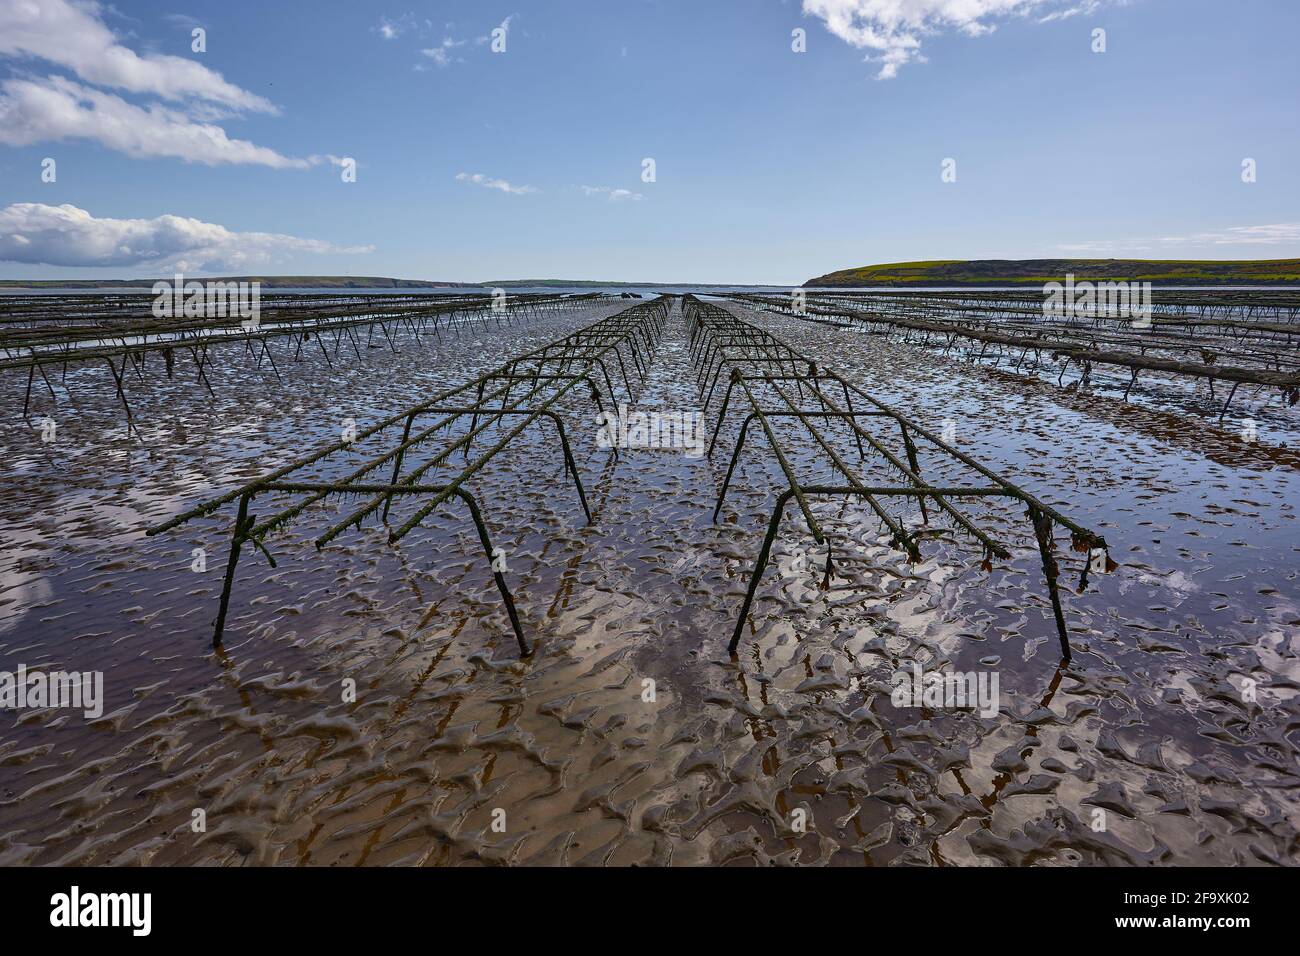 empty lines of oyster beds for farming. aquaculture in Waterford Ireland. Stock Photo